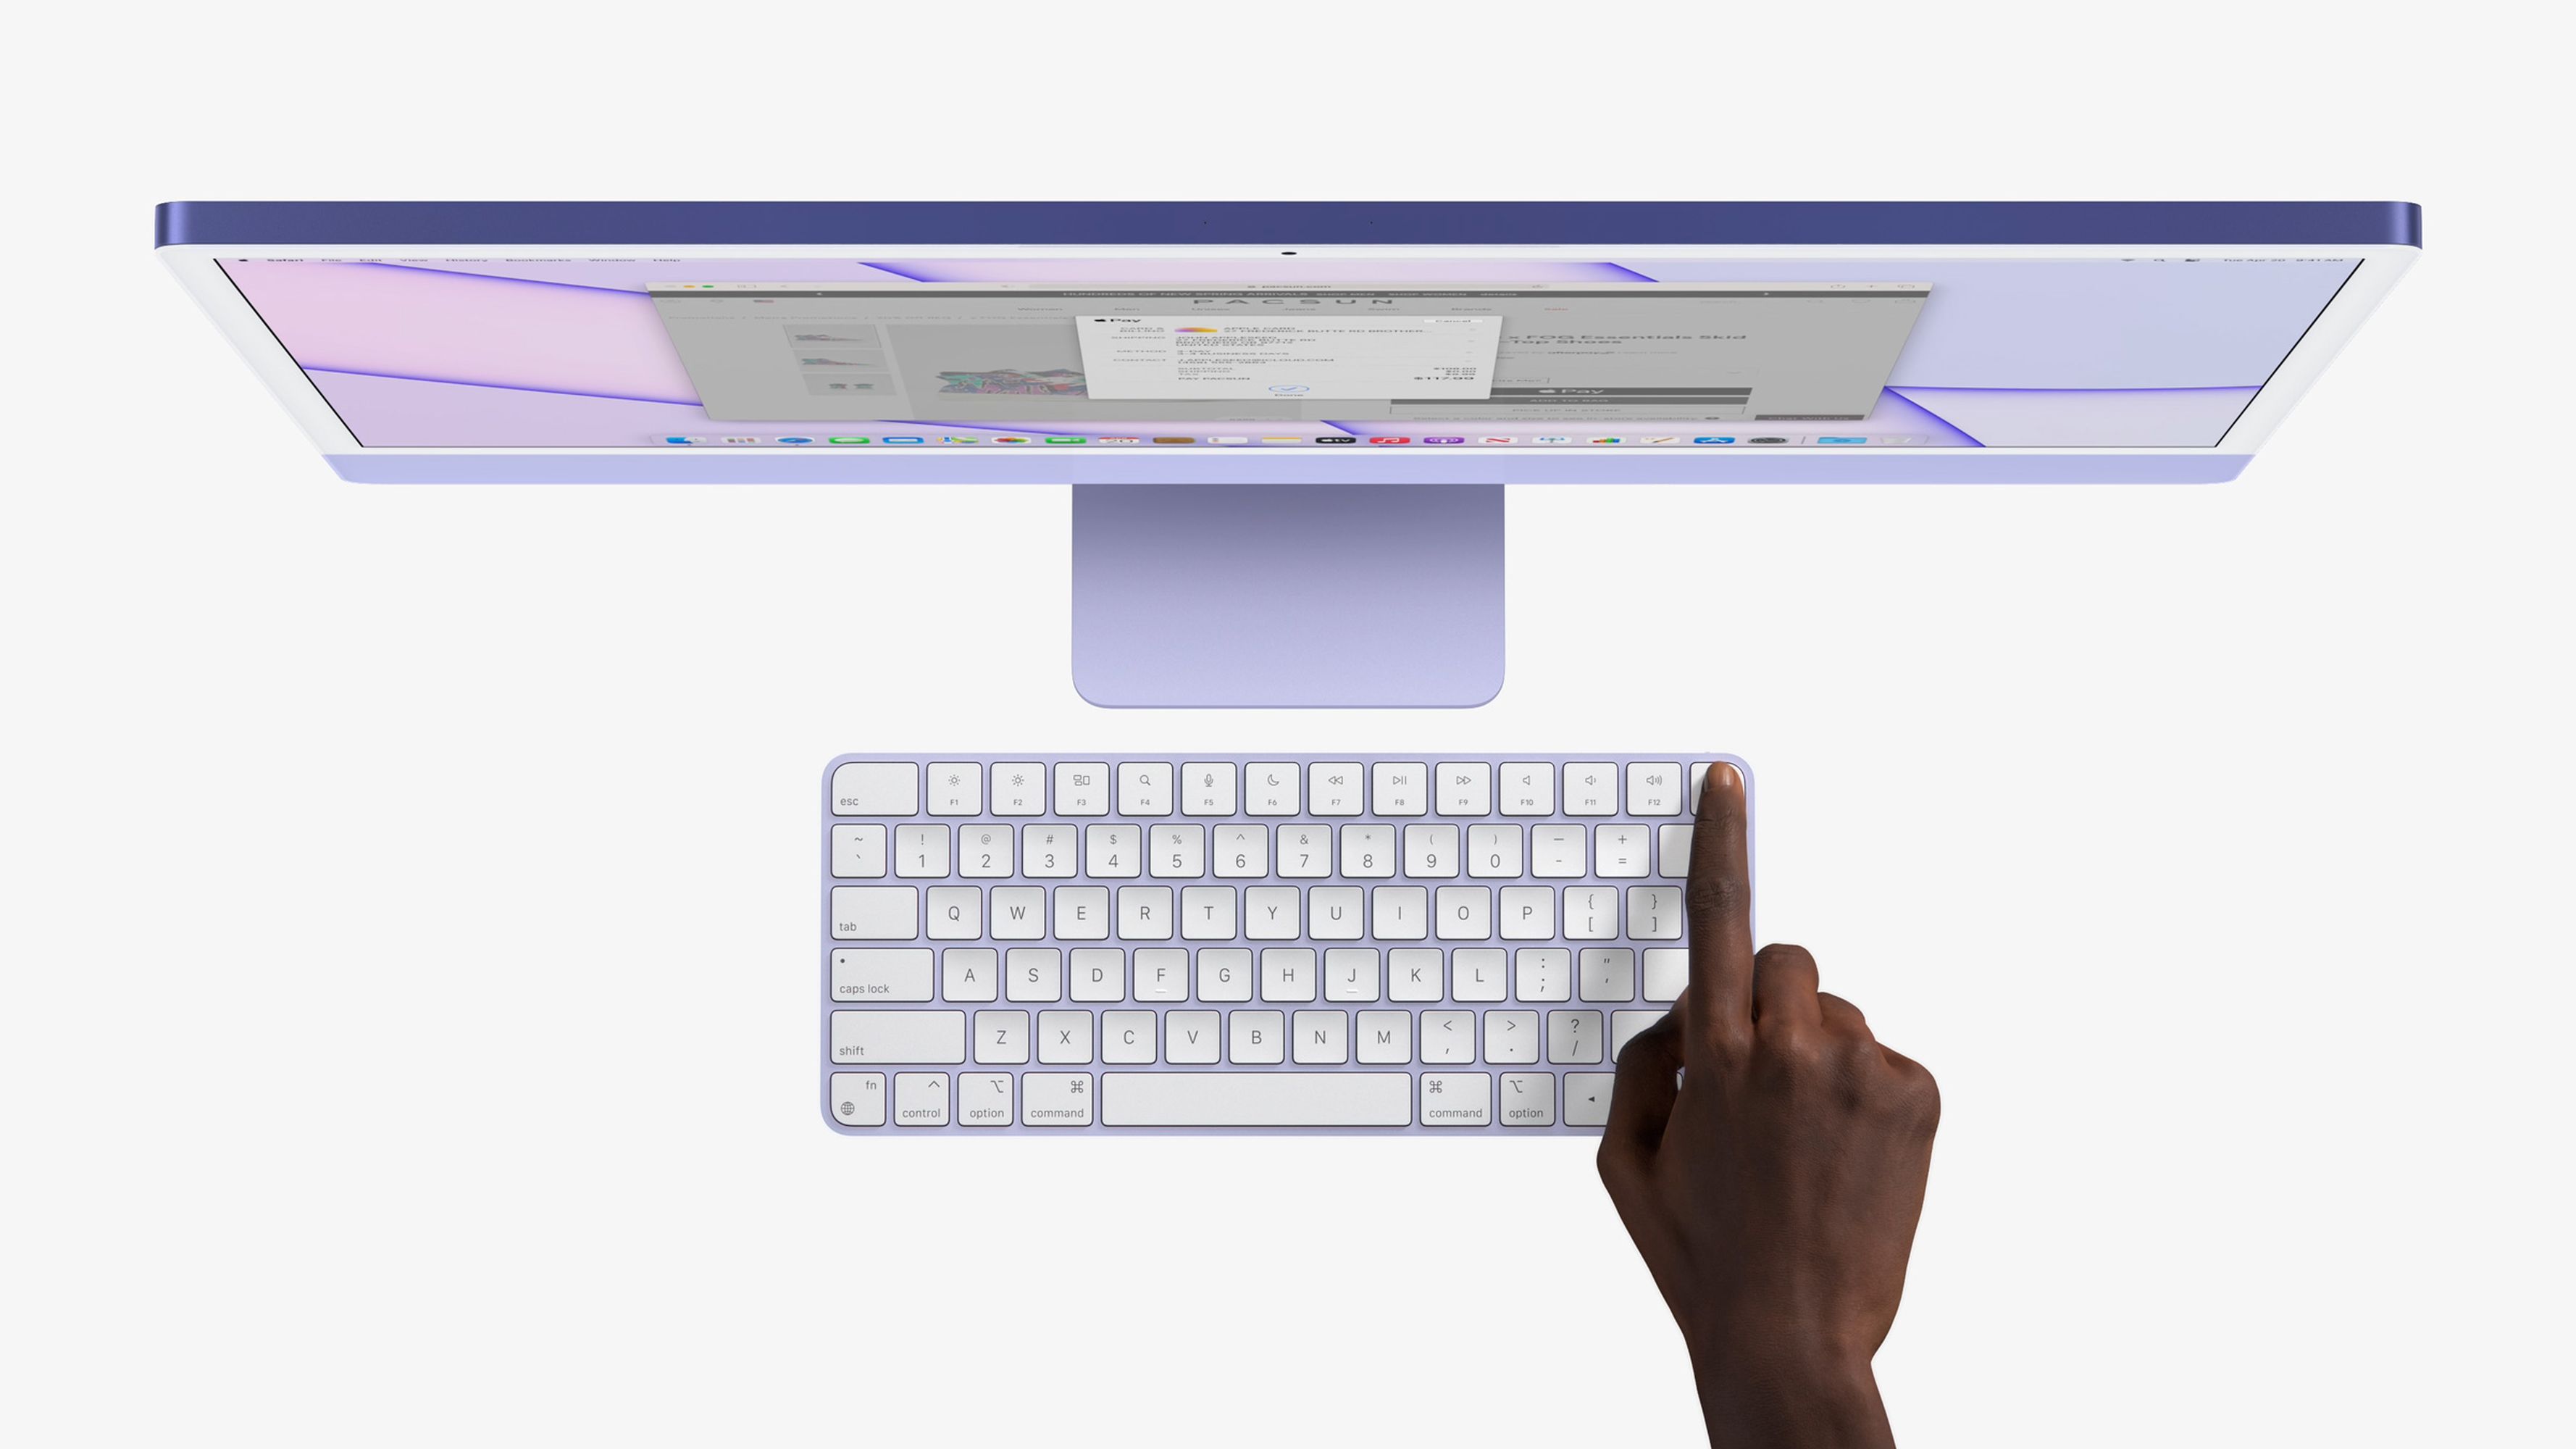 Apple starts selling Magic keyboard with built-in Touch ID for $149